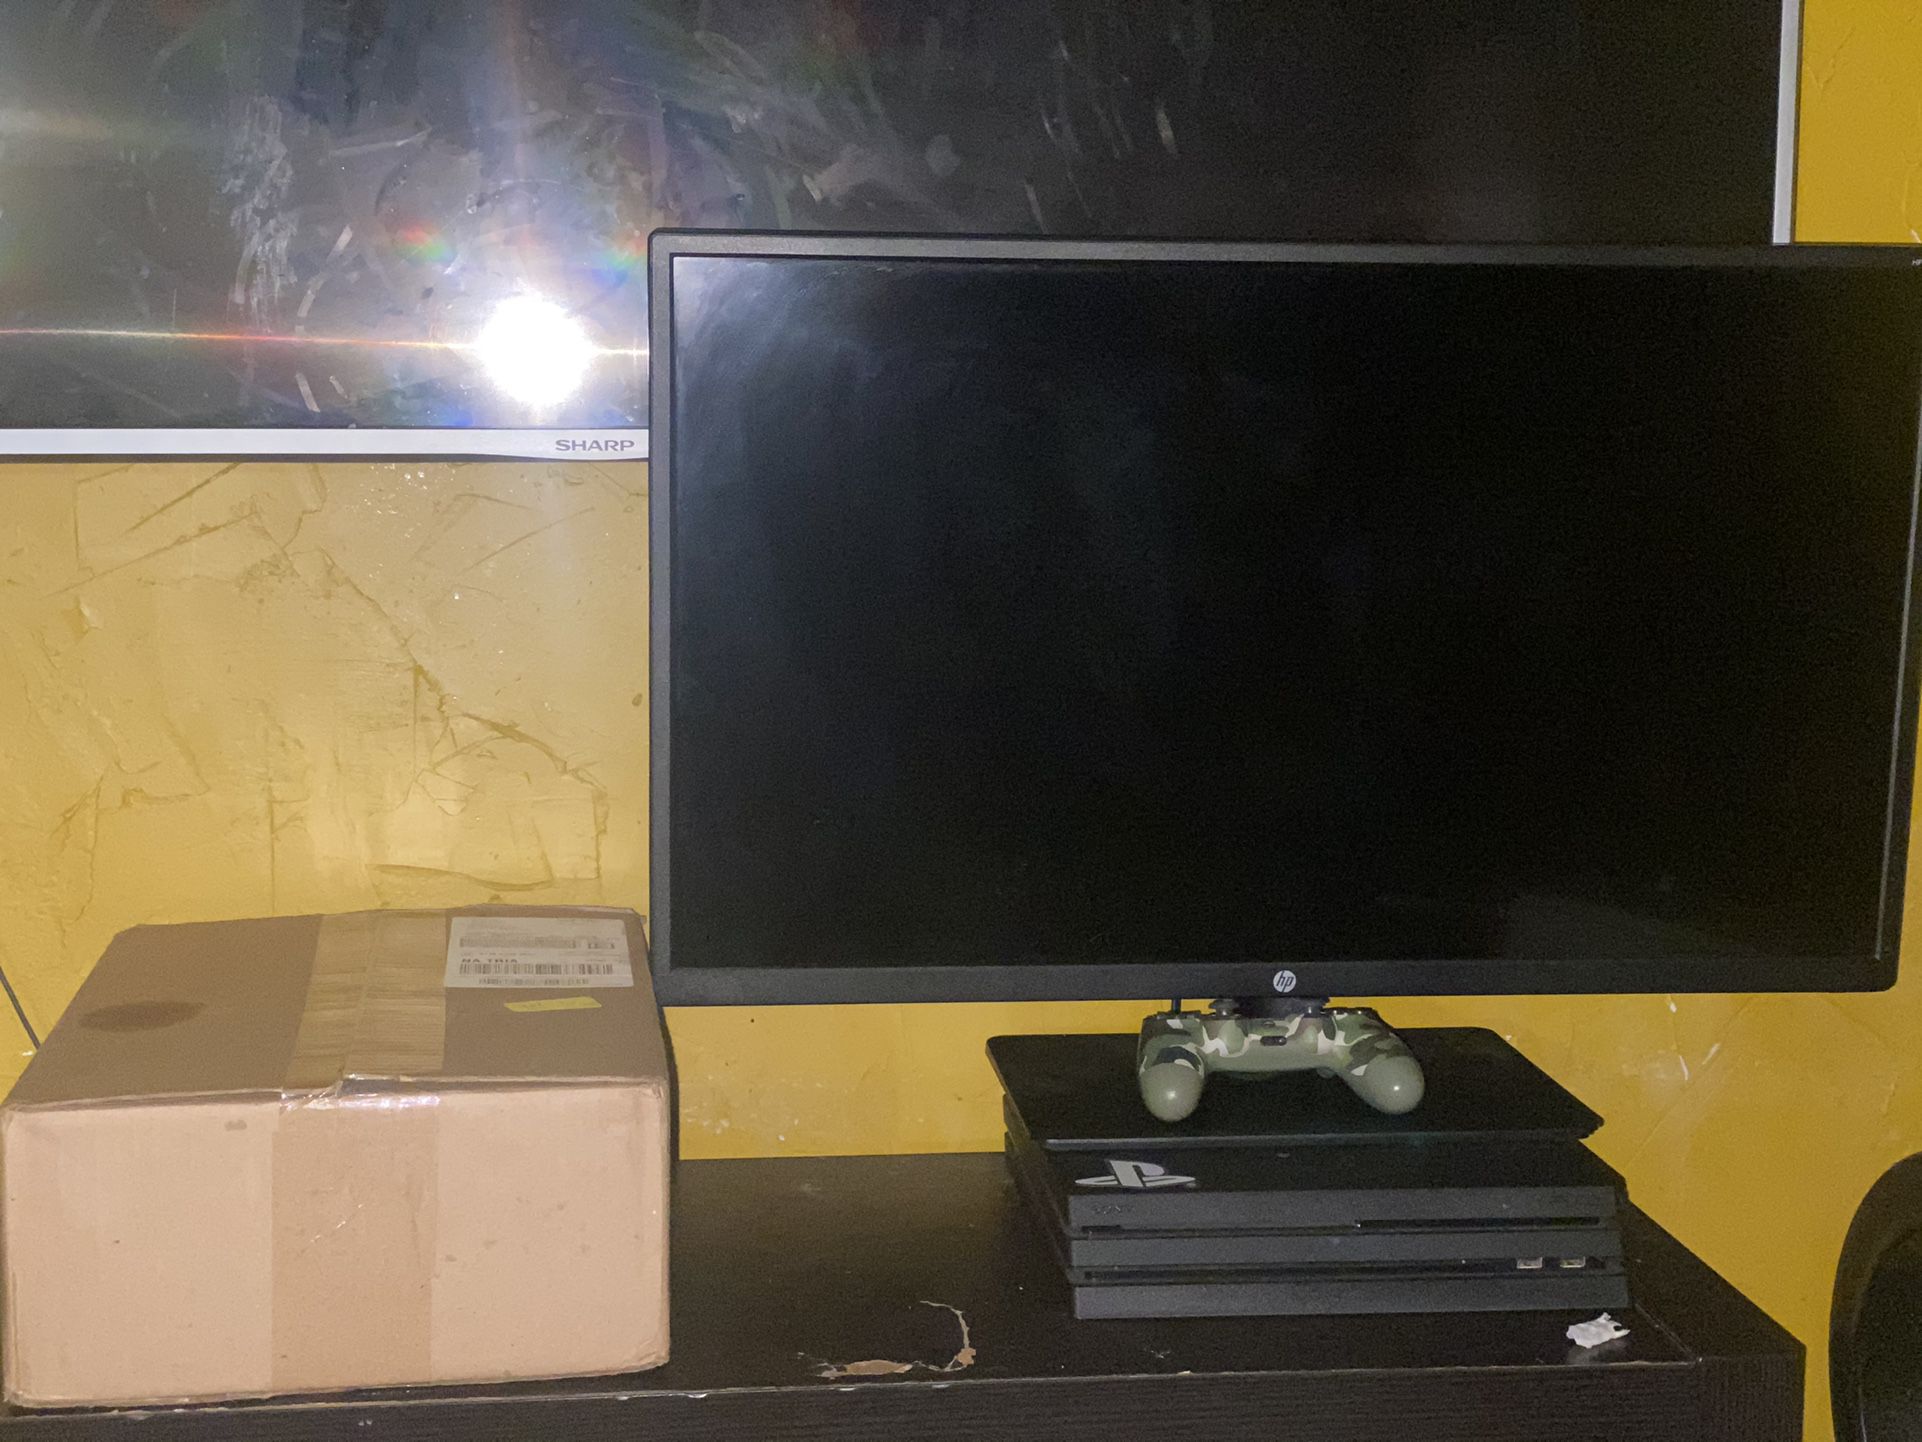 XBOX SERIES S, PS4 PRO, and GAMING MONITOR